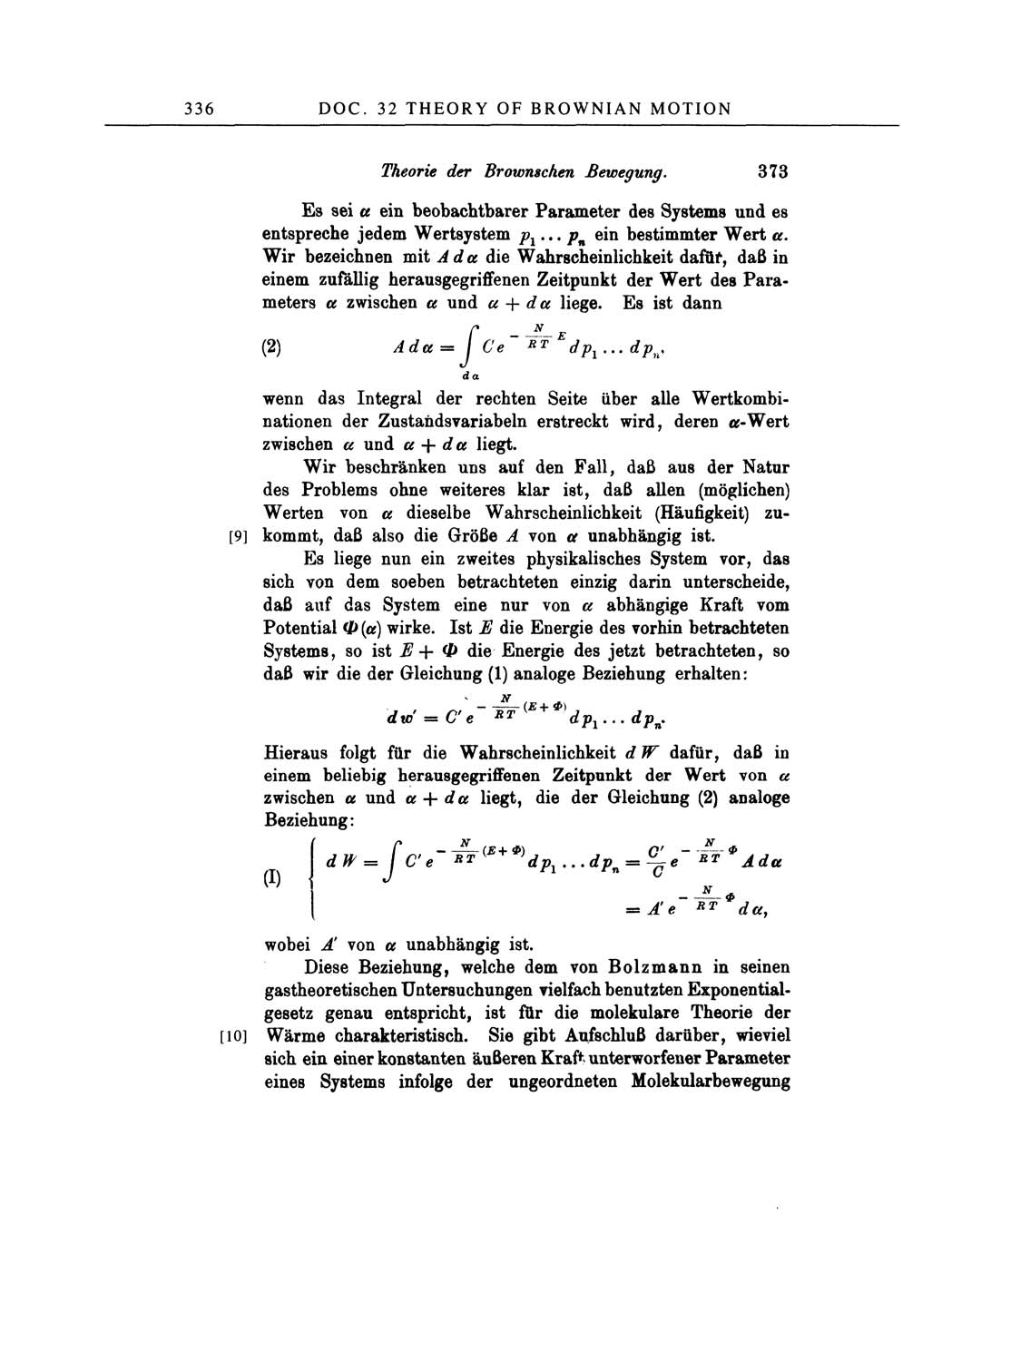 Volume 2: The Swiss Years: Writings, 1900-1909 page 336